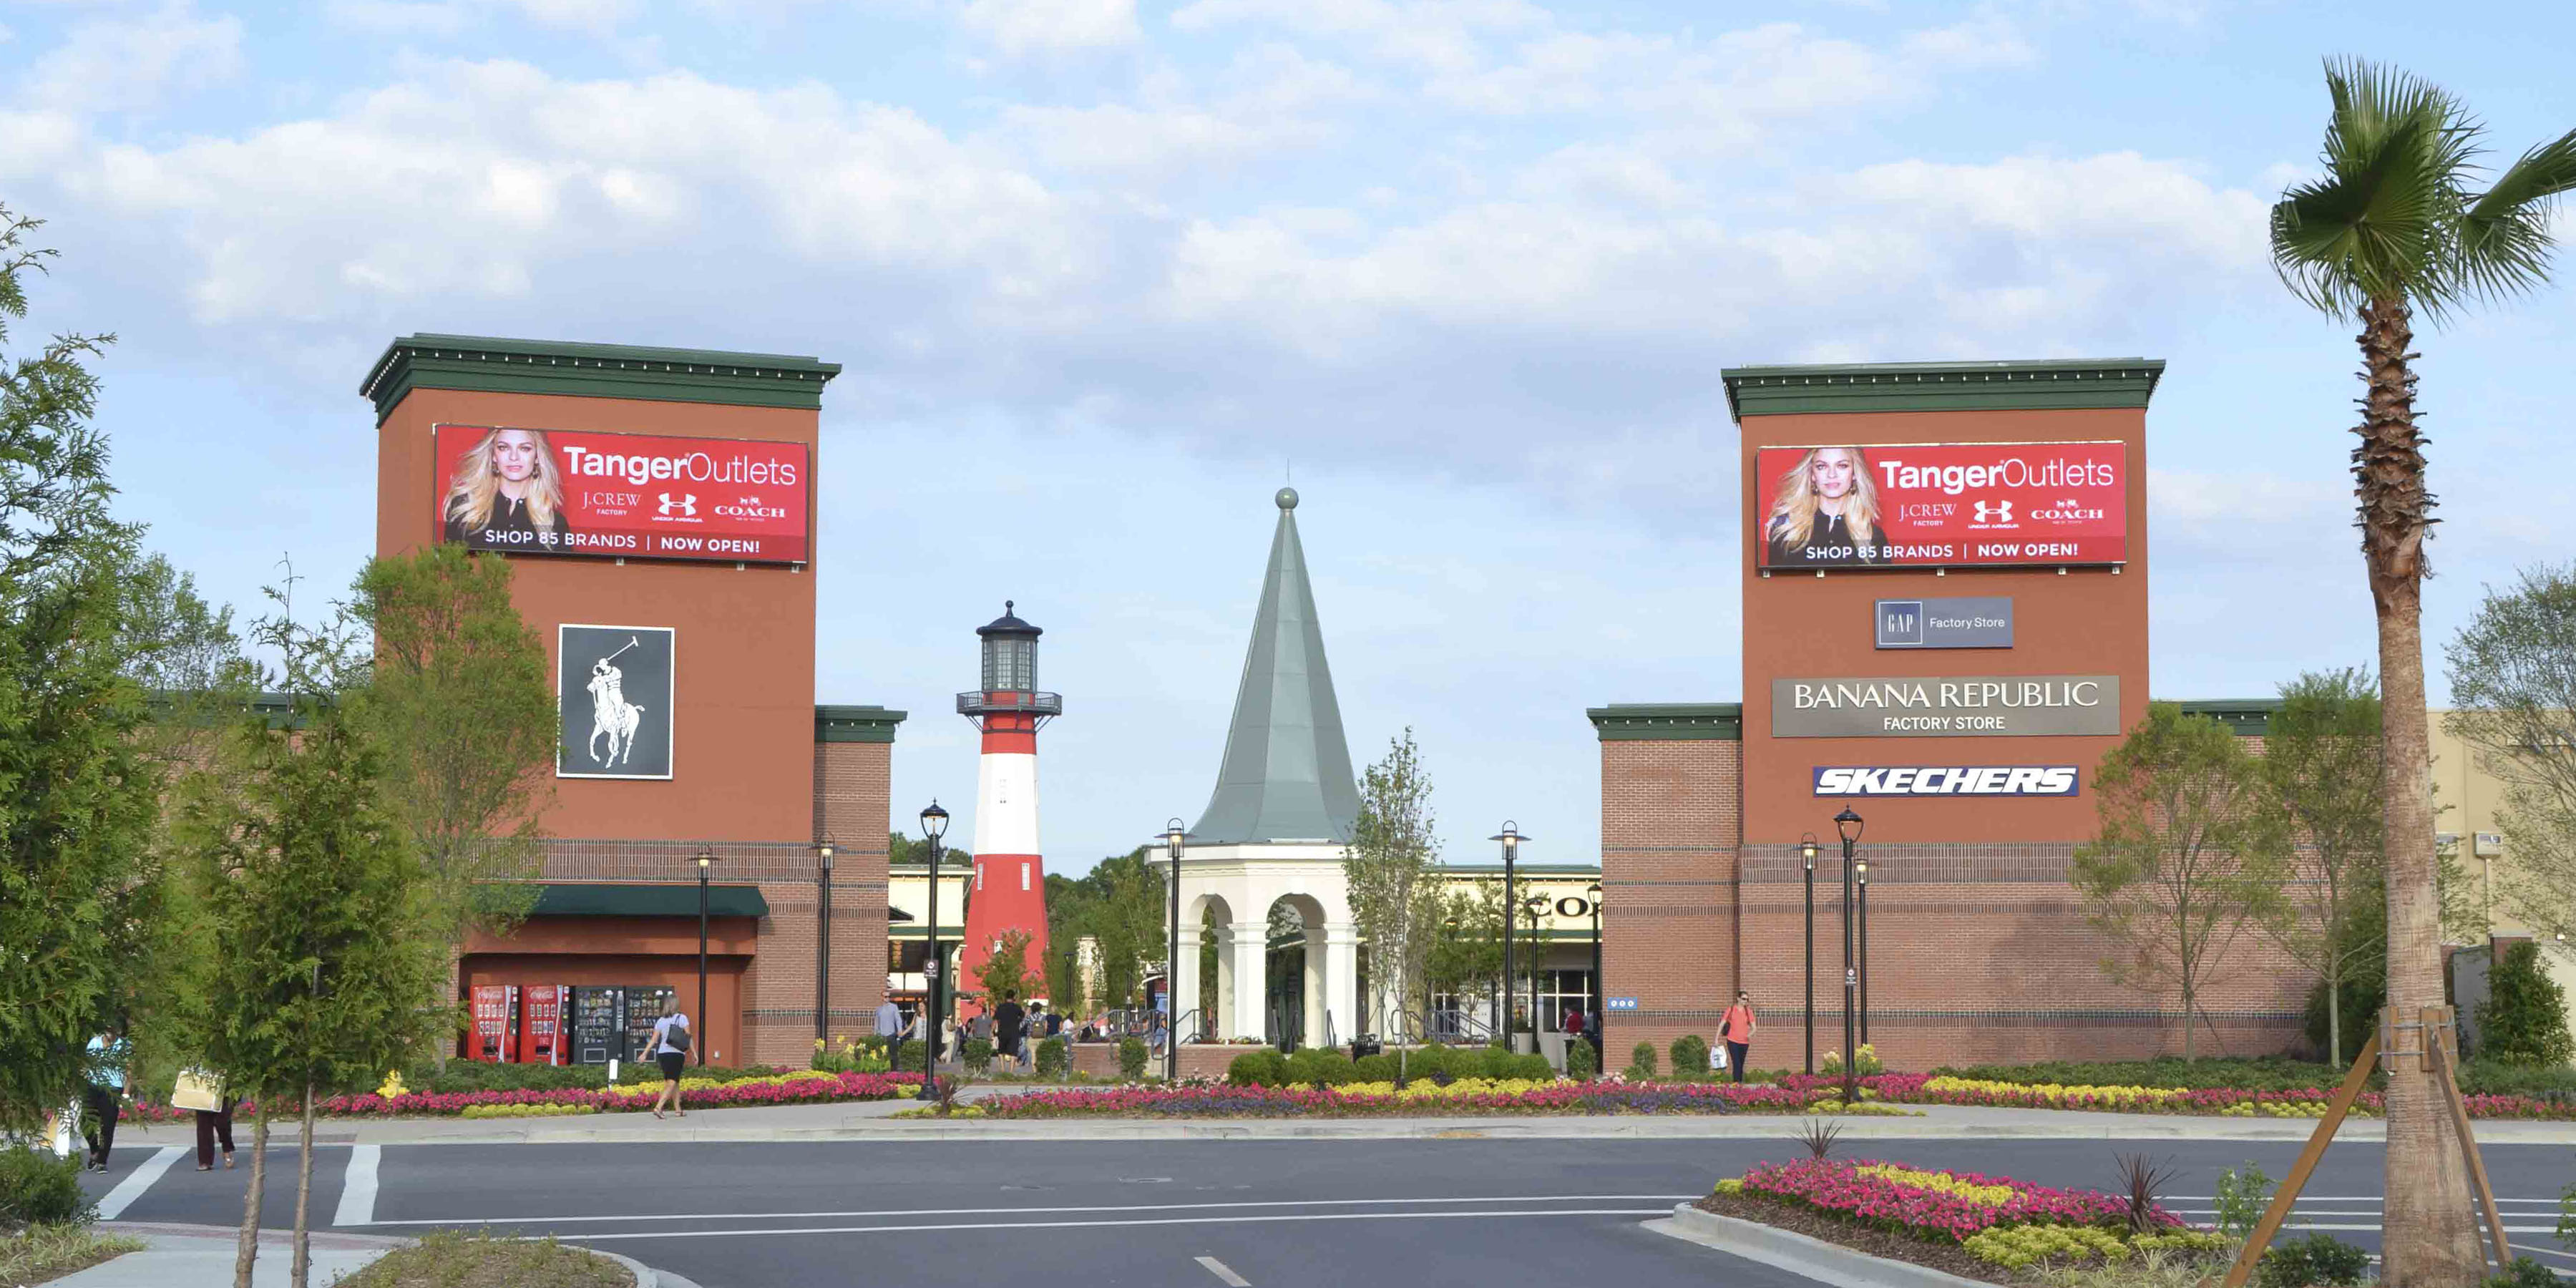 LANE BRYANT - 200 Tanger Outlet Blvd, Pooler, Georgia - Accessories - Phone  Number - Yelp